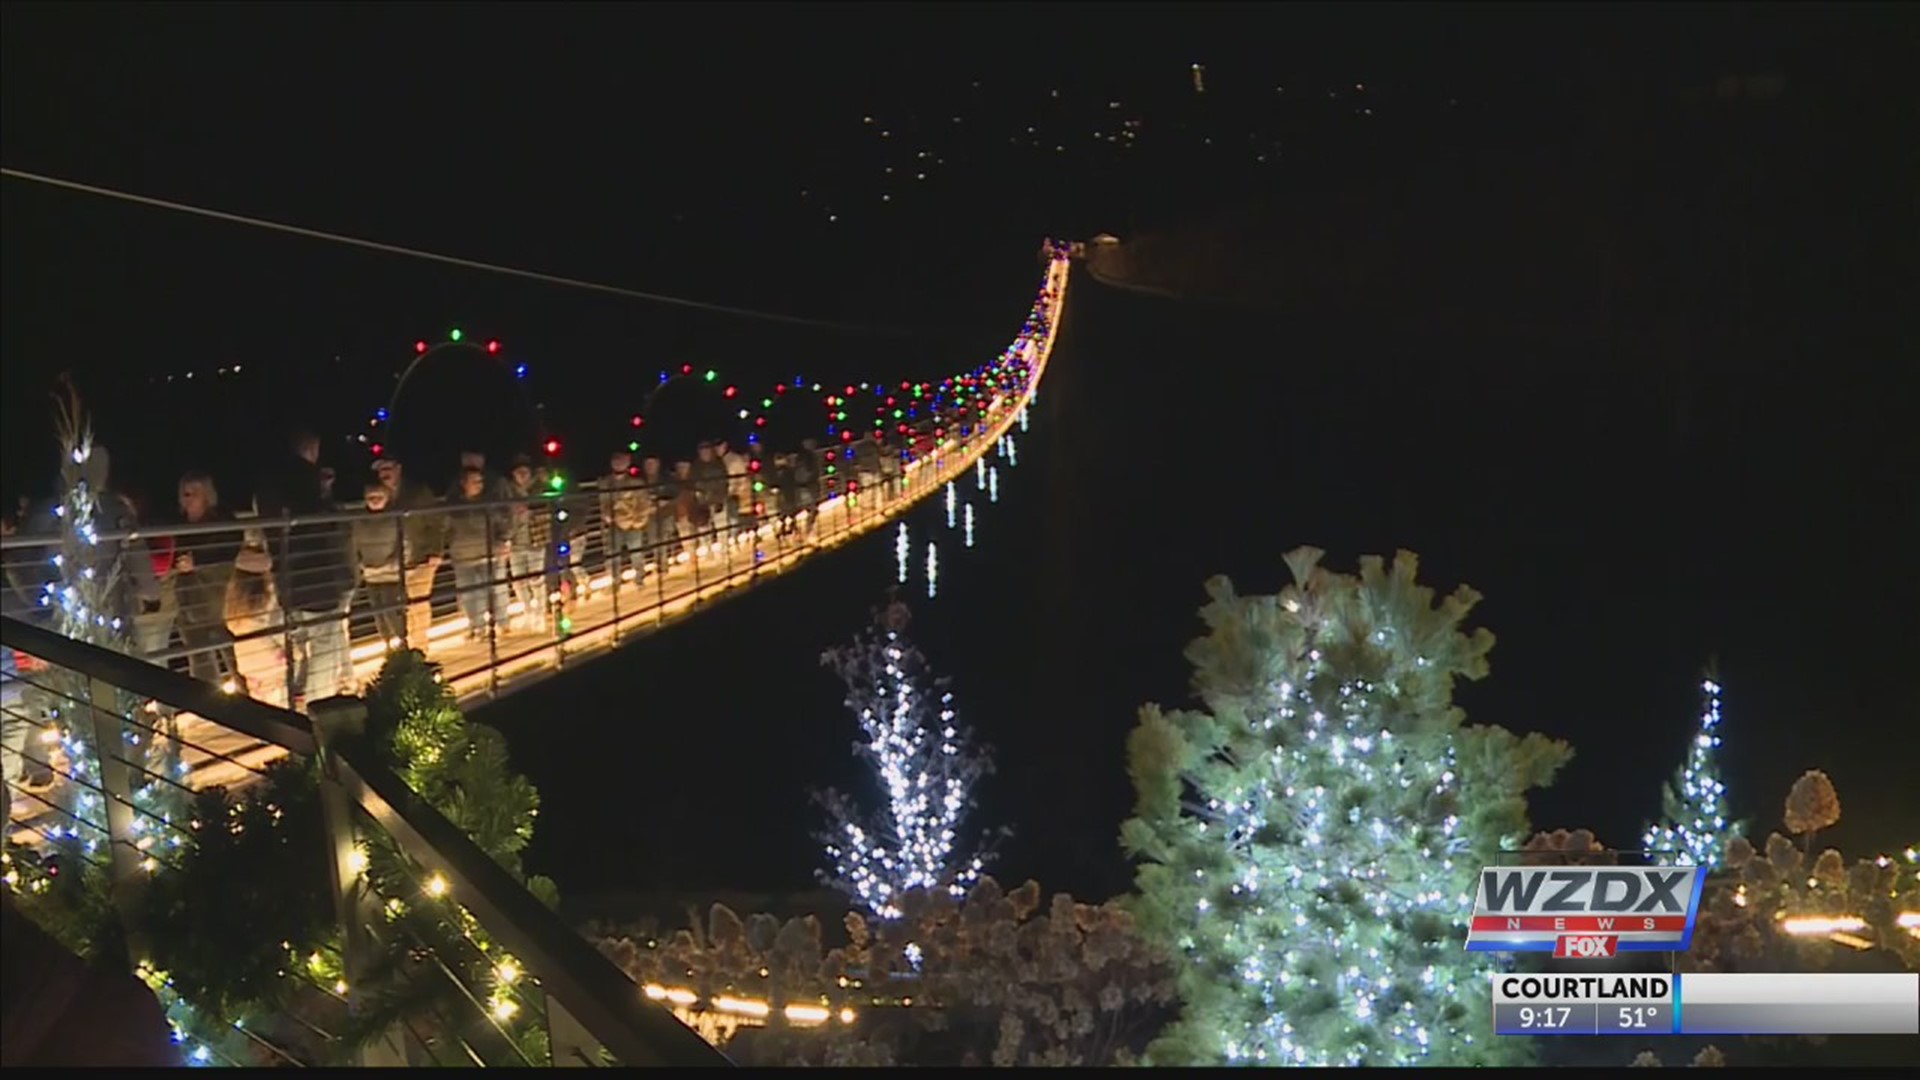 Gatlinburg Sky Lift Park in Tennessee is decking out its bridge with lights and archways.